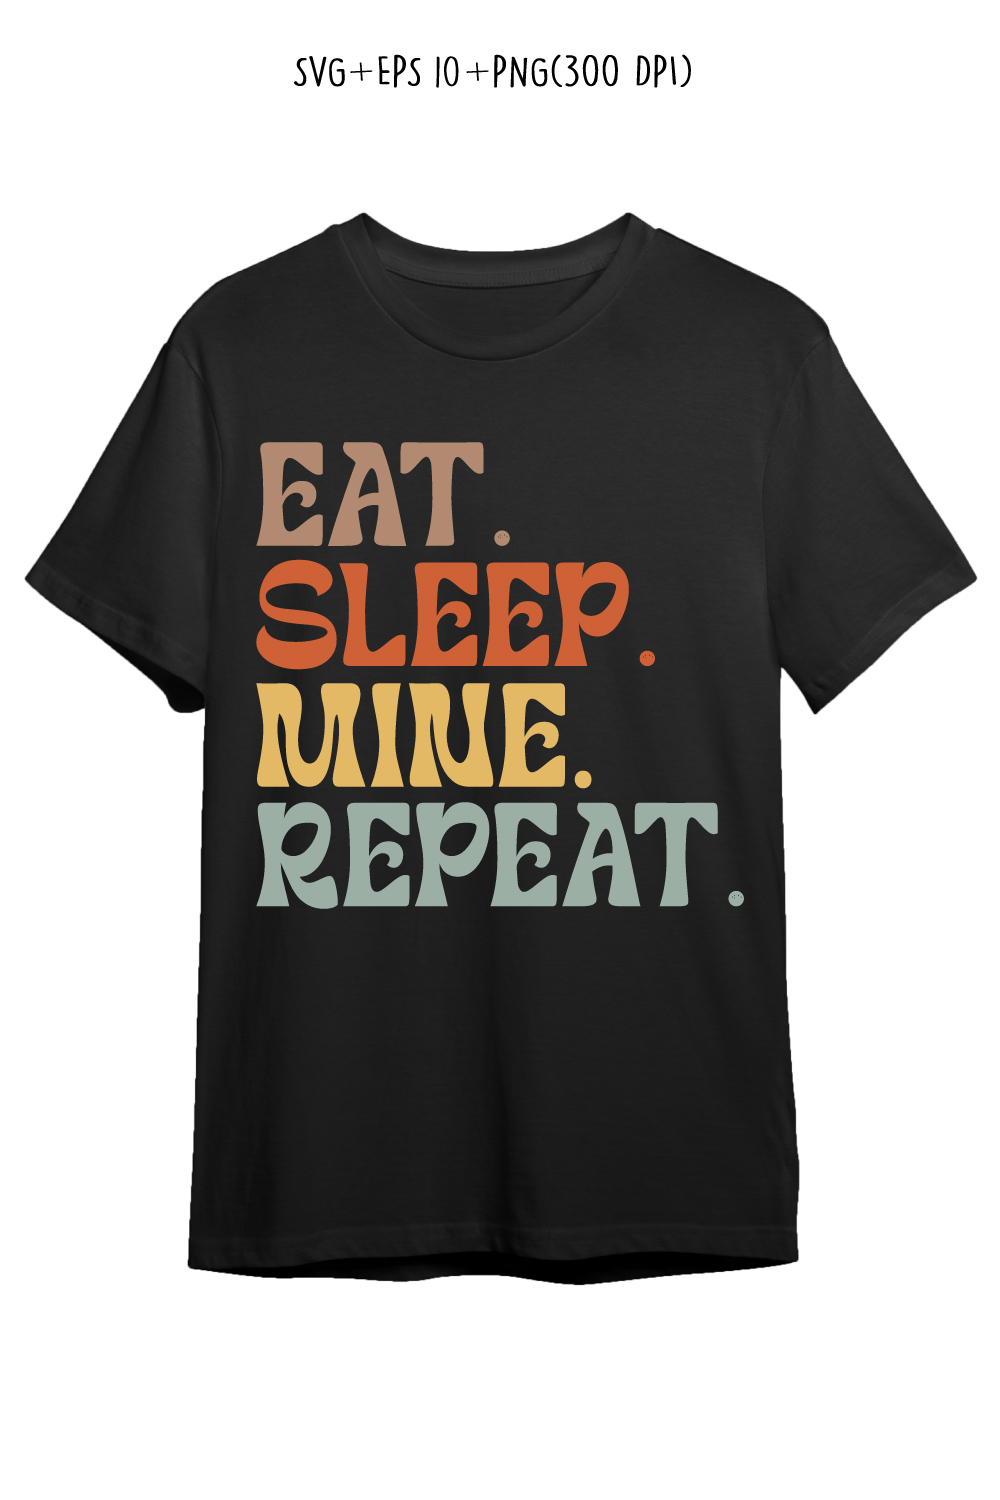 Eat Sleep mine Repeat typography design for t-shirts, cards, frame artwork, phone cases, bags, mugs, stickers, tumblers, print, etc pinterest preview image.